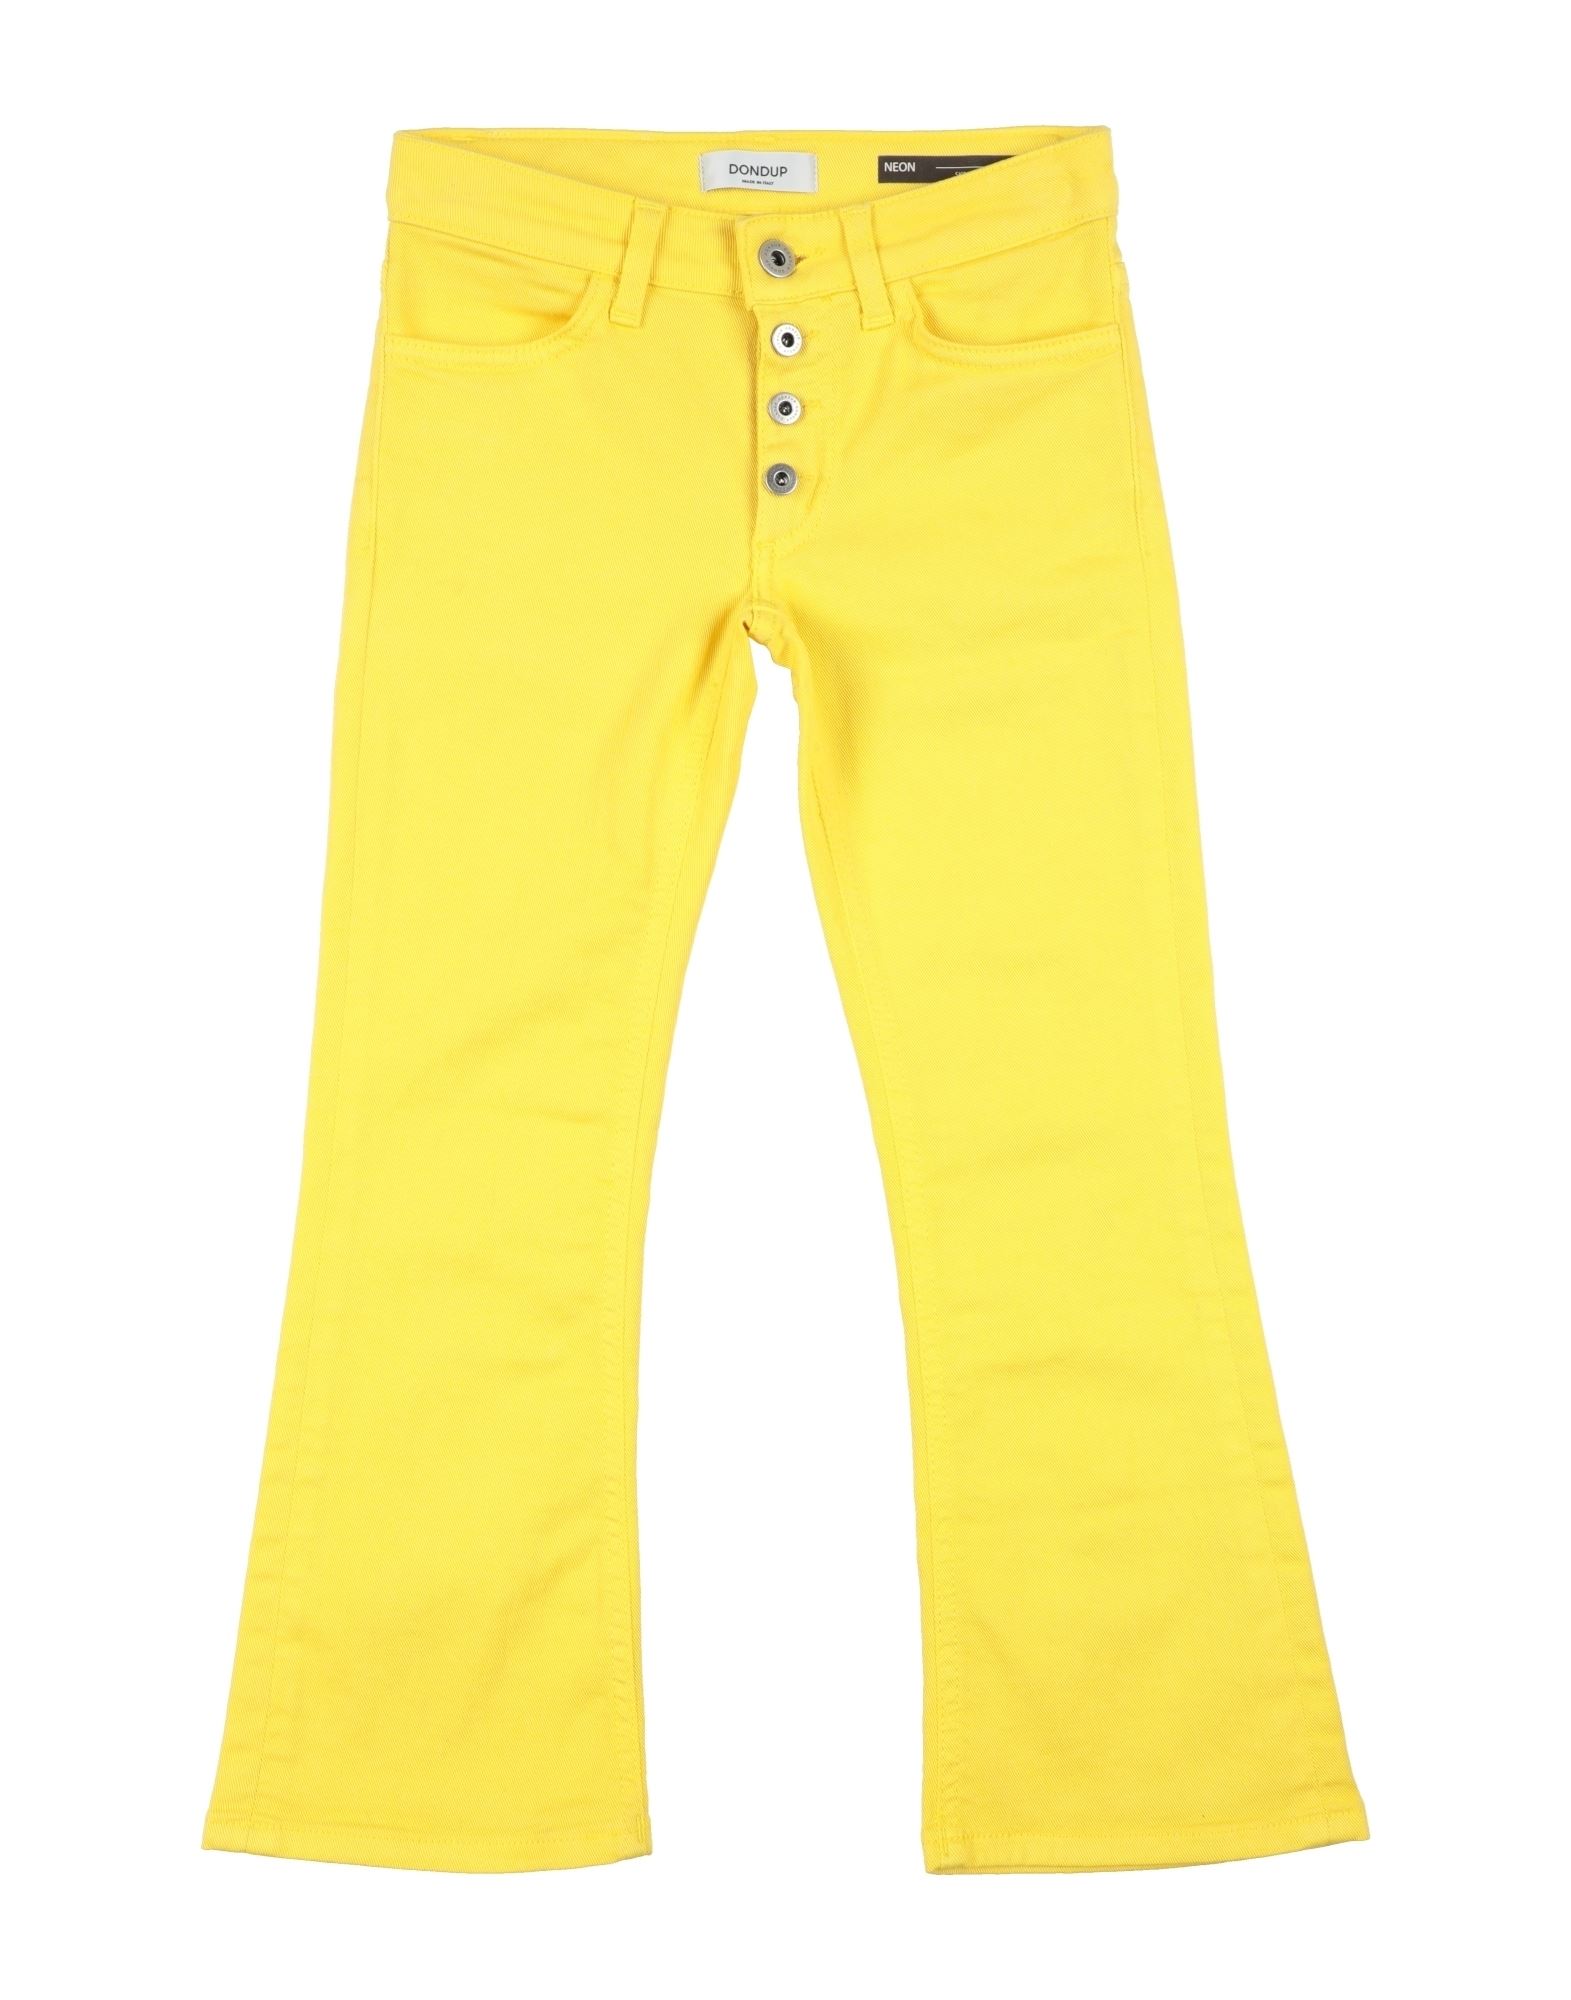 Dondup Kids' Jeans In Yellow